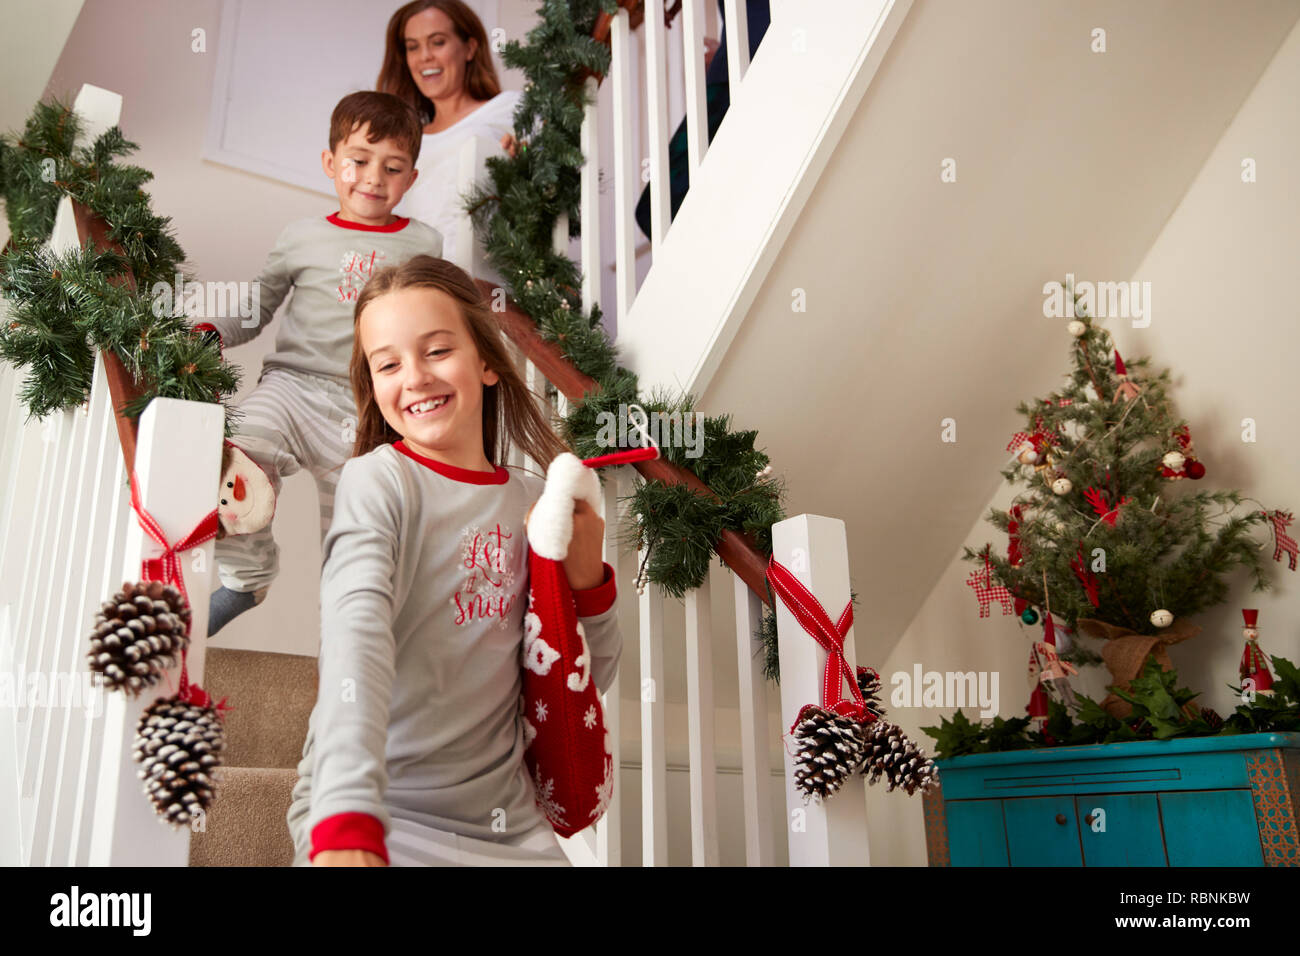 Excited Family Wearing Pajamas Running Down Stairs Holding Stockings On Christmas Morning Stock Photo